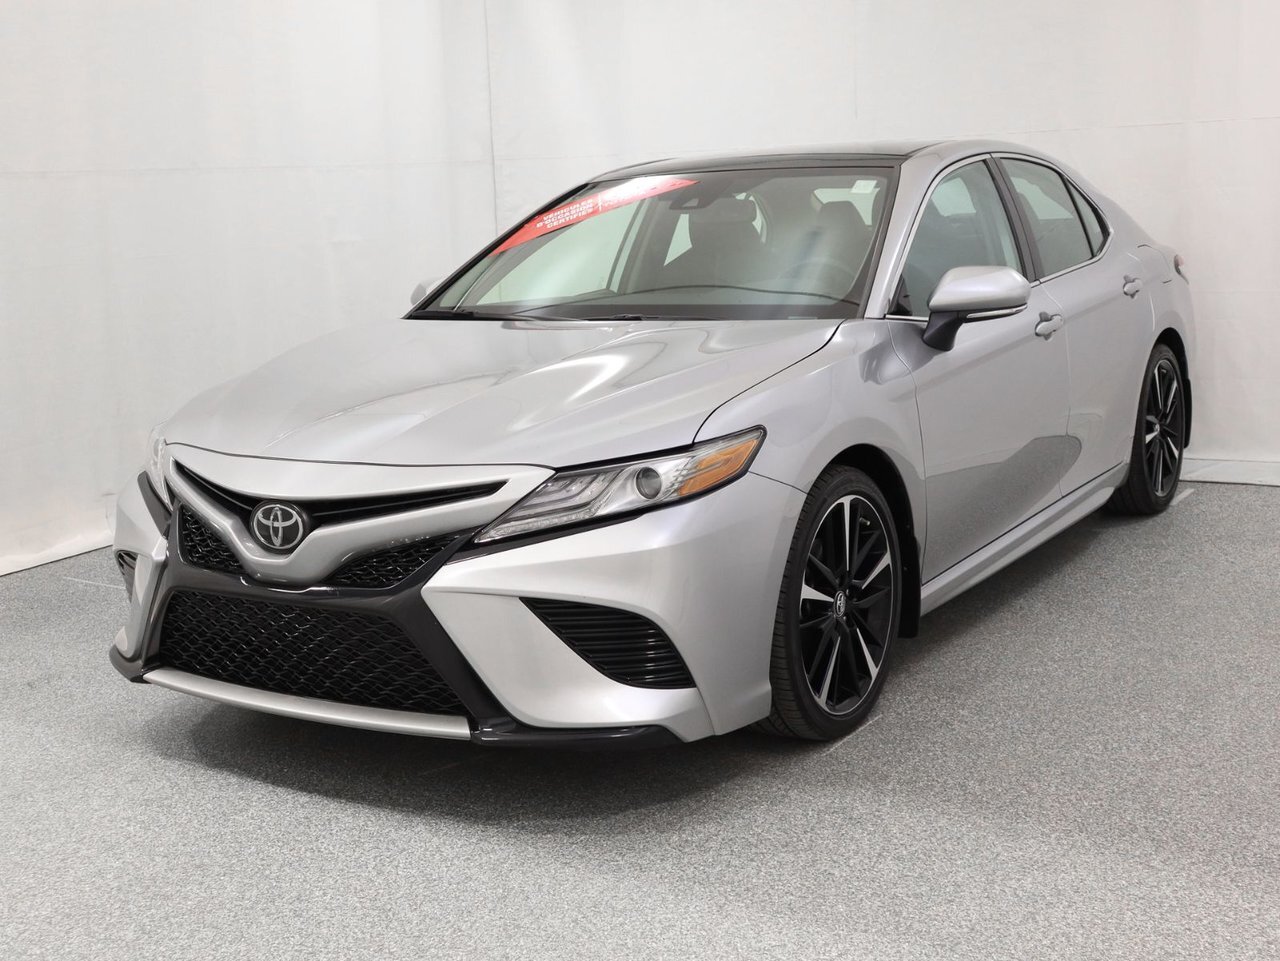 2019 Toyota Camry XSE LOW MILEAGE, LEATHER, HEATED SEATS, SUNROOF, M